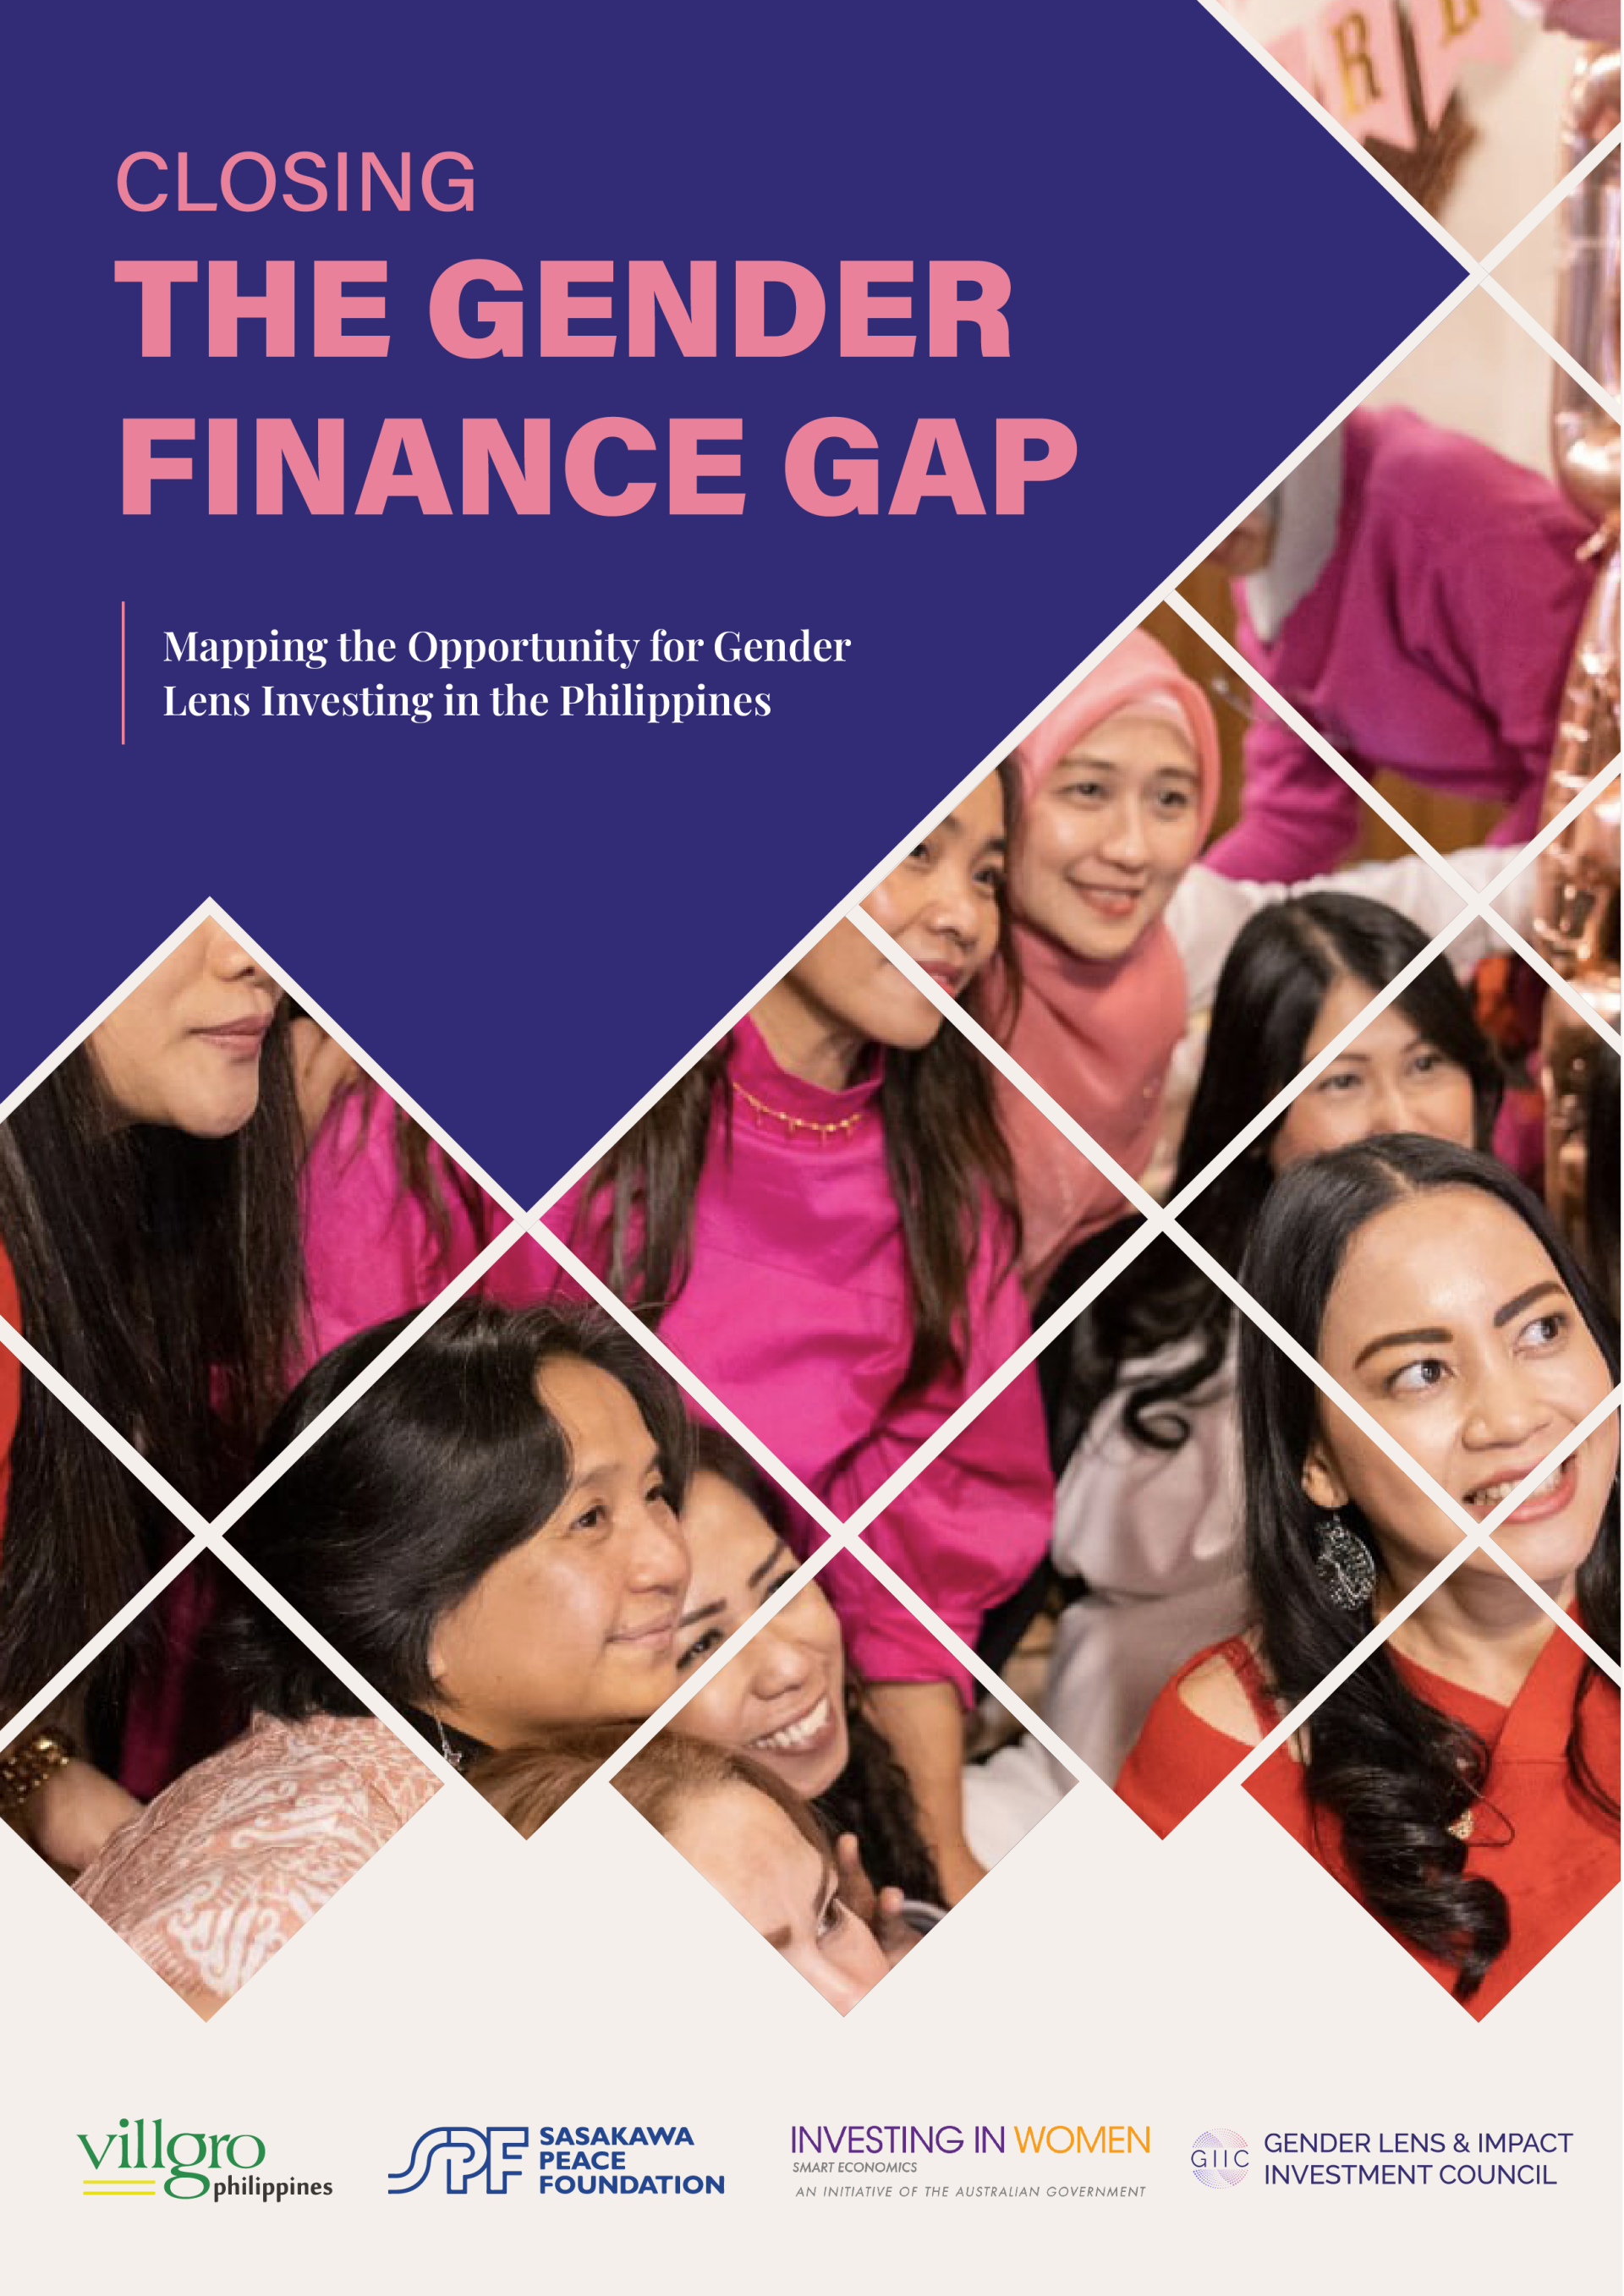 Closing the Gender Finance Gap: Mapping the Opportunity for Gender Lens Investing in the Philippines